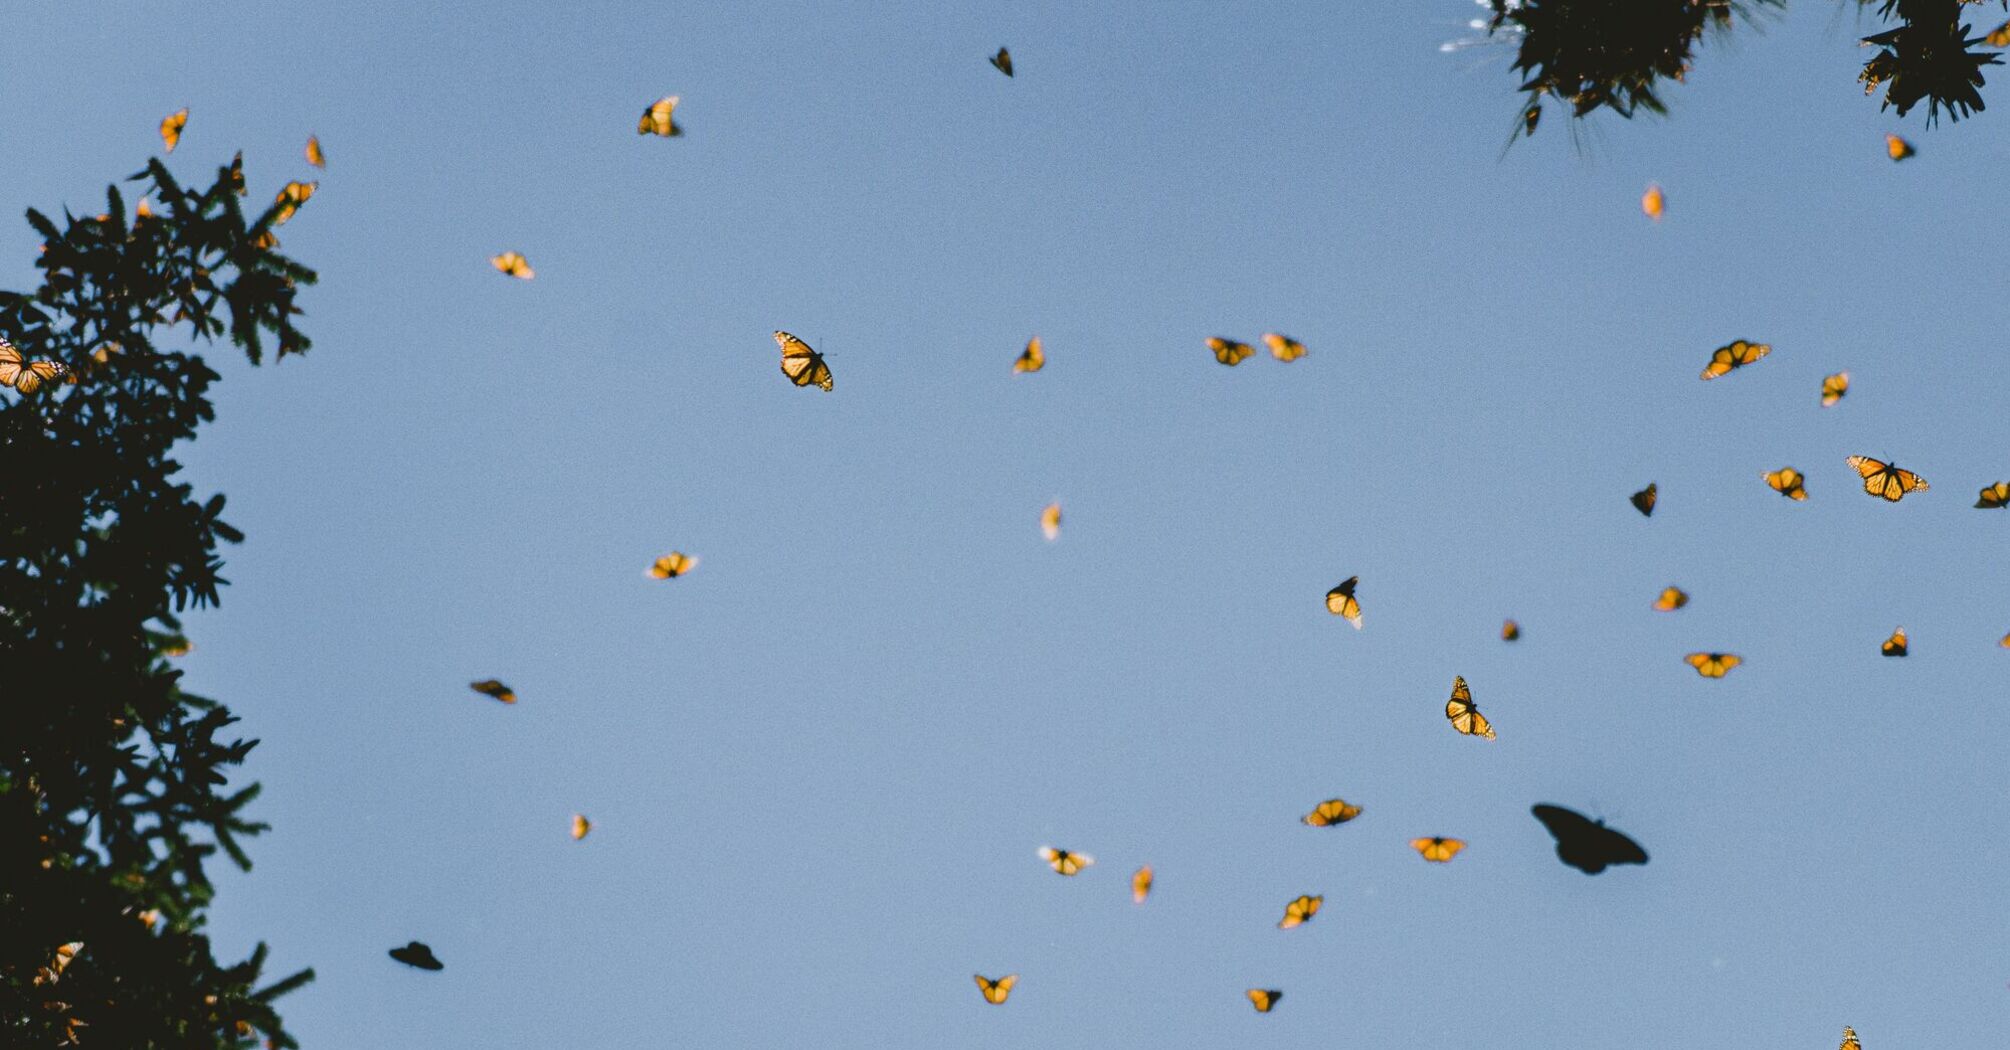 Flock of butterflies flying under blue sky during daytime